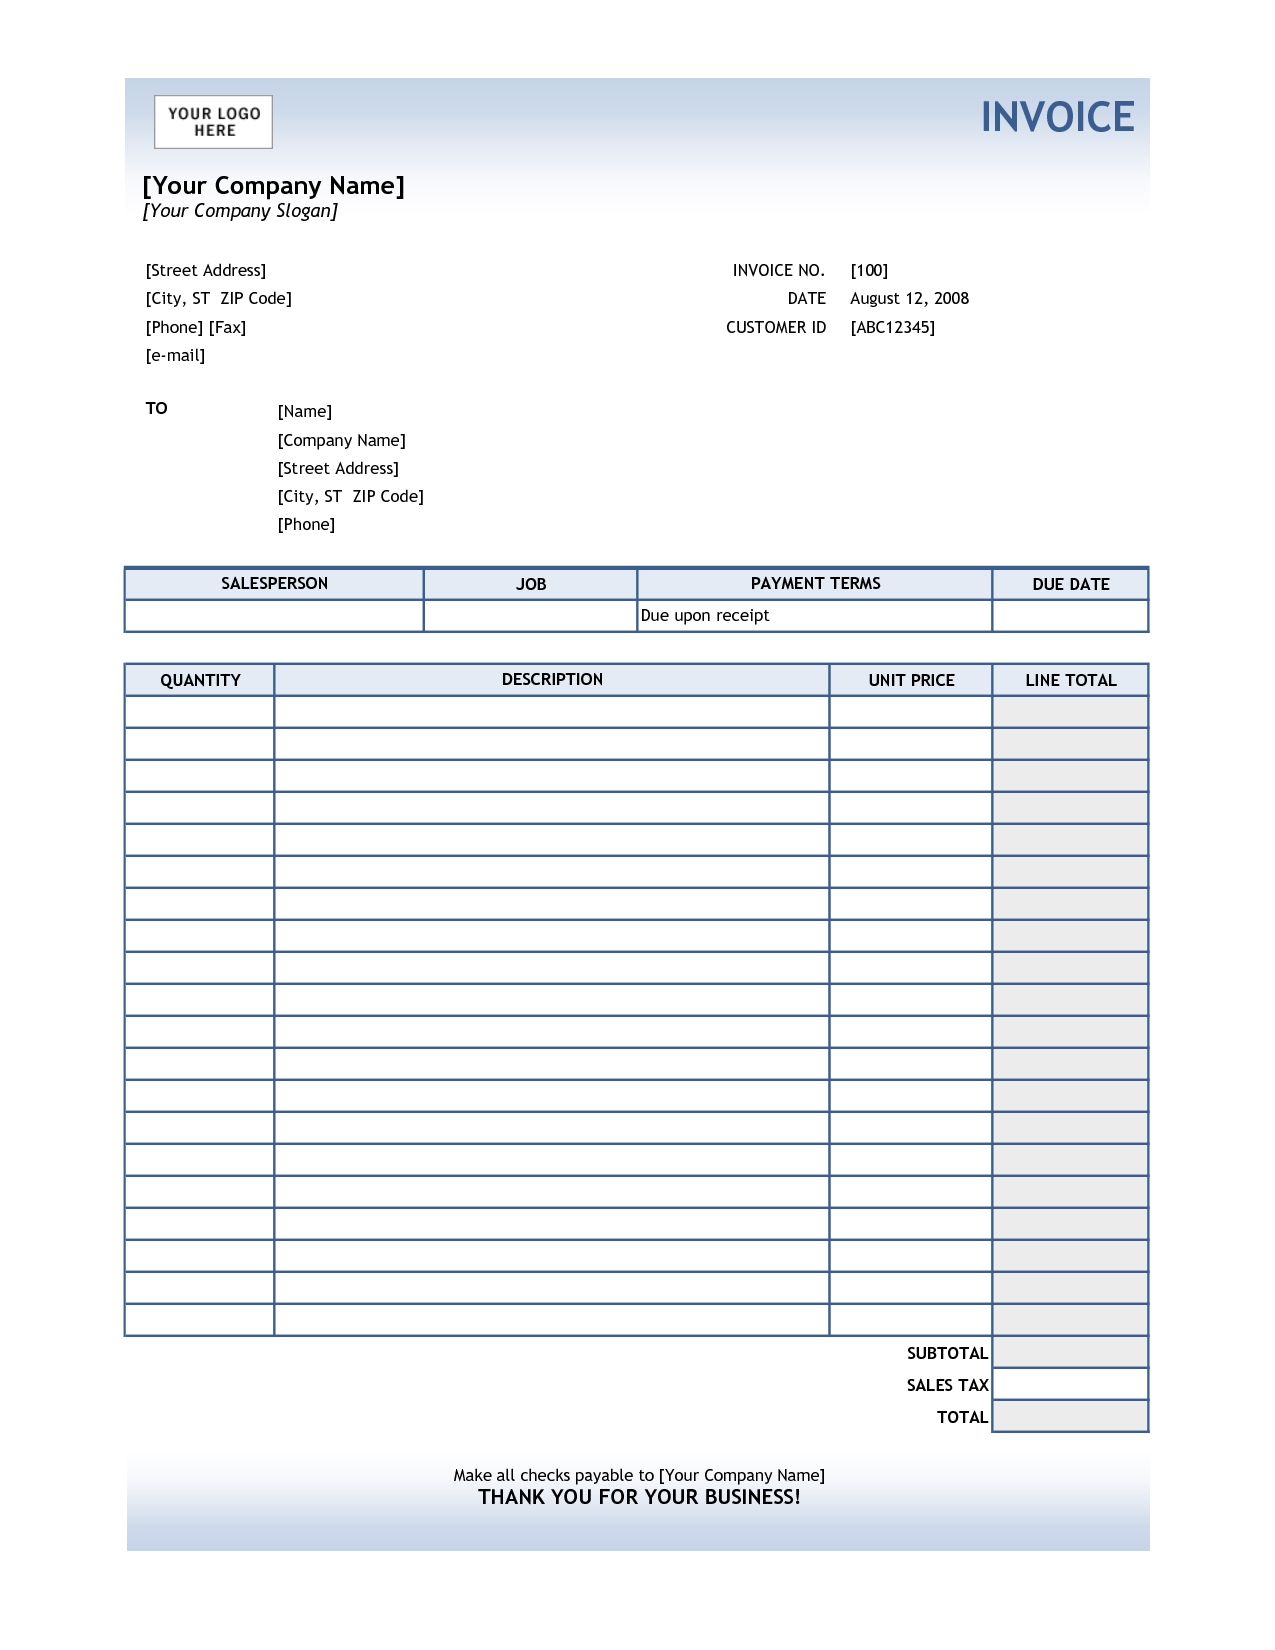 invoice template excel 2010 other template category page 108 datemplate 1275 X 1650